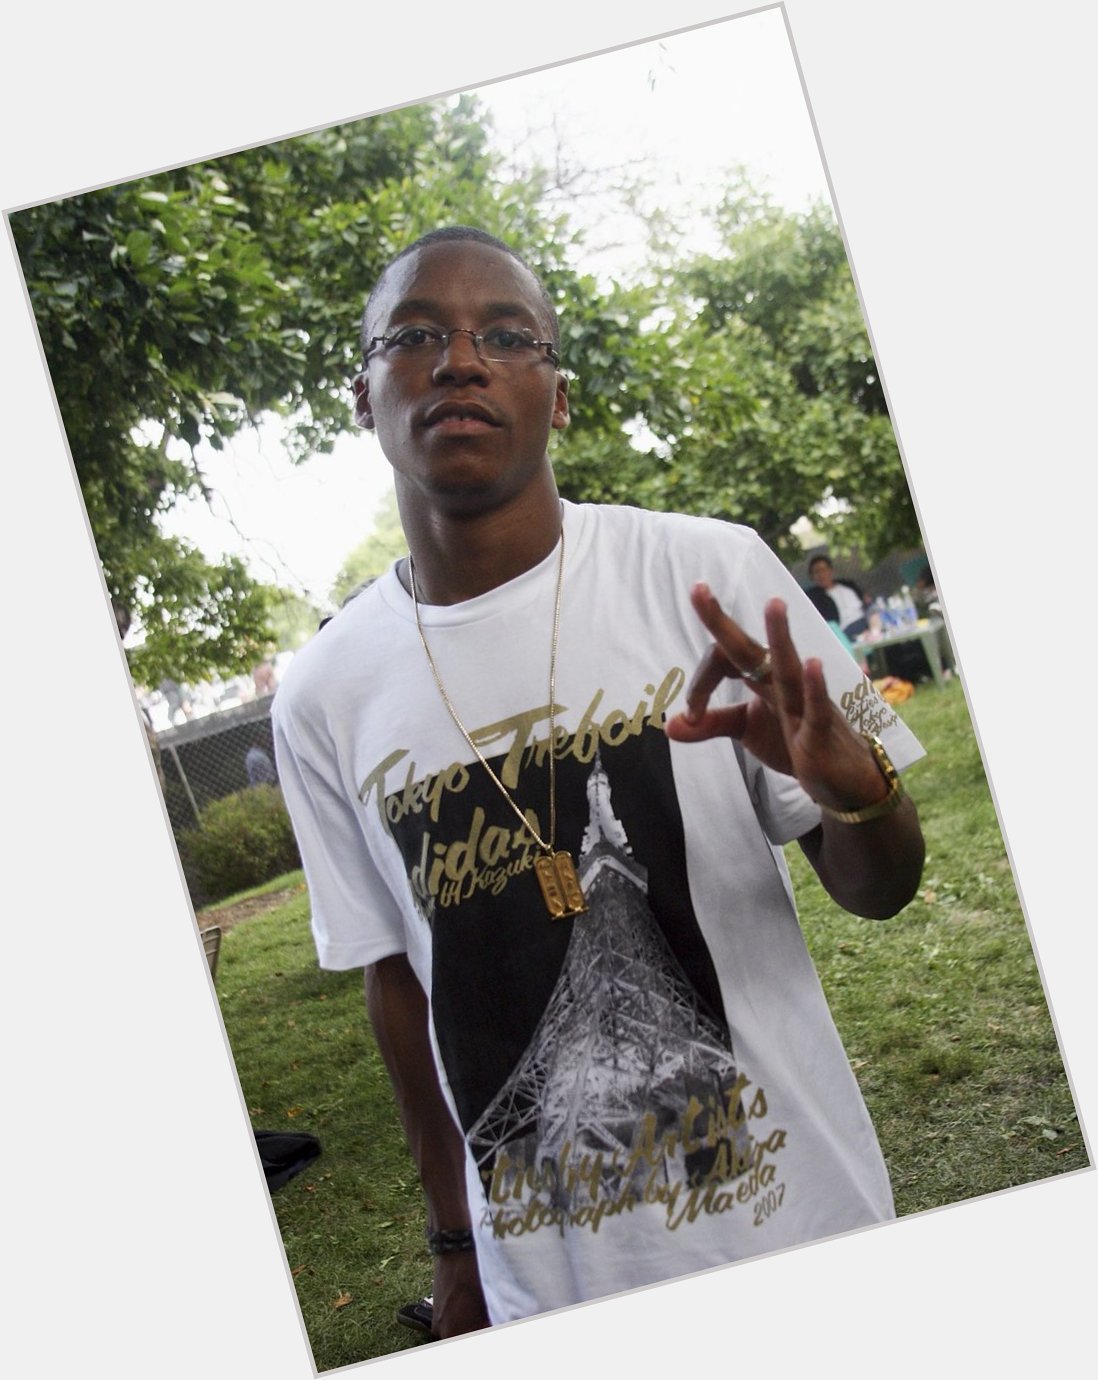 Happy 41st Birthday, Lupe Fiasco! 

What s your favorite song of his? 